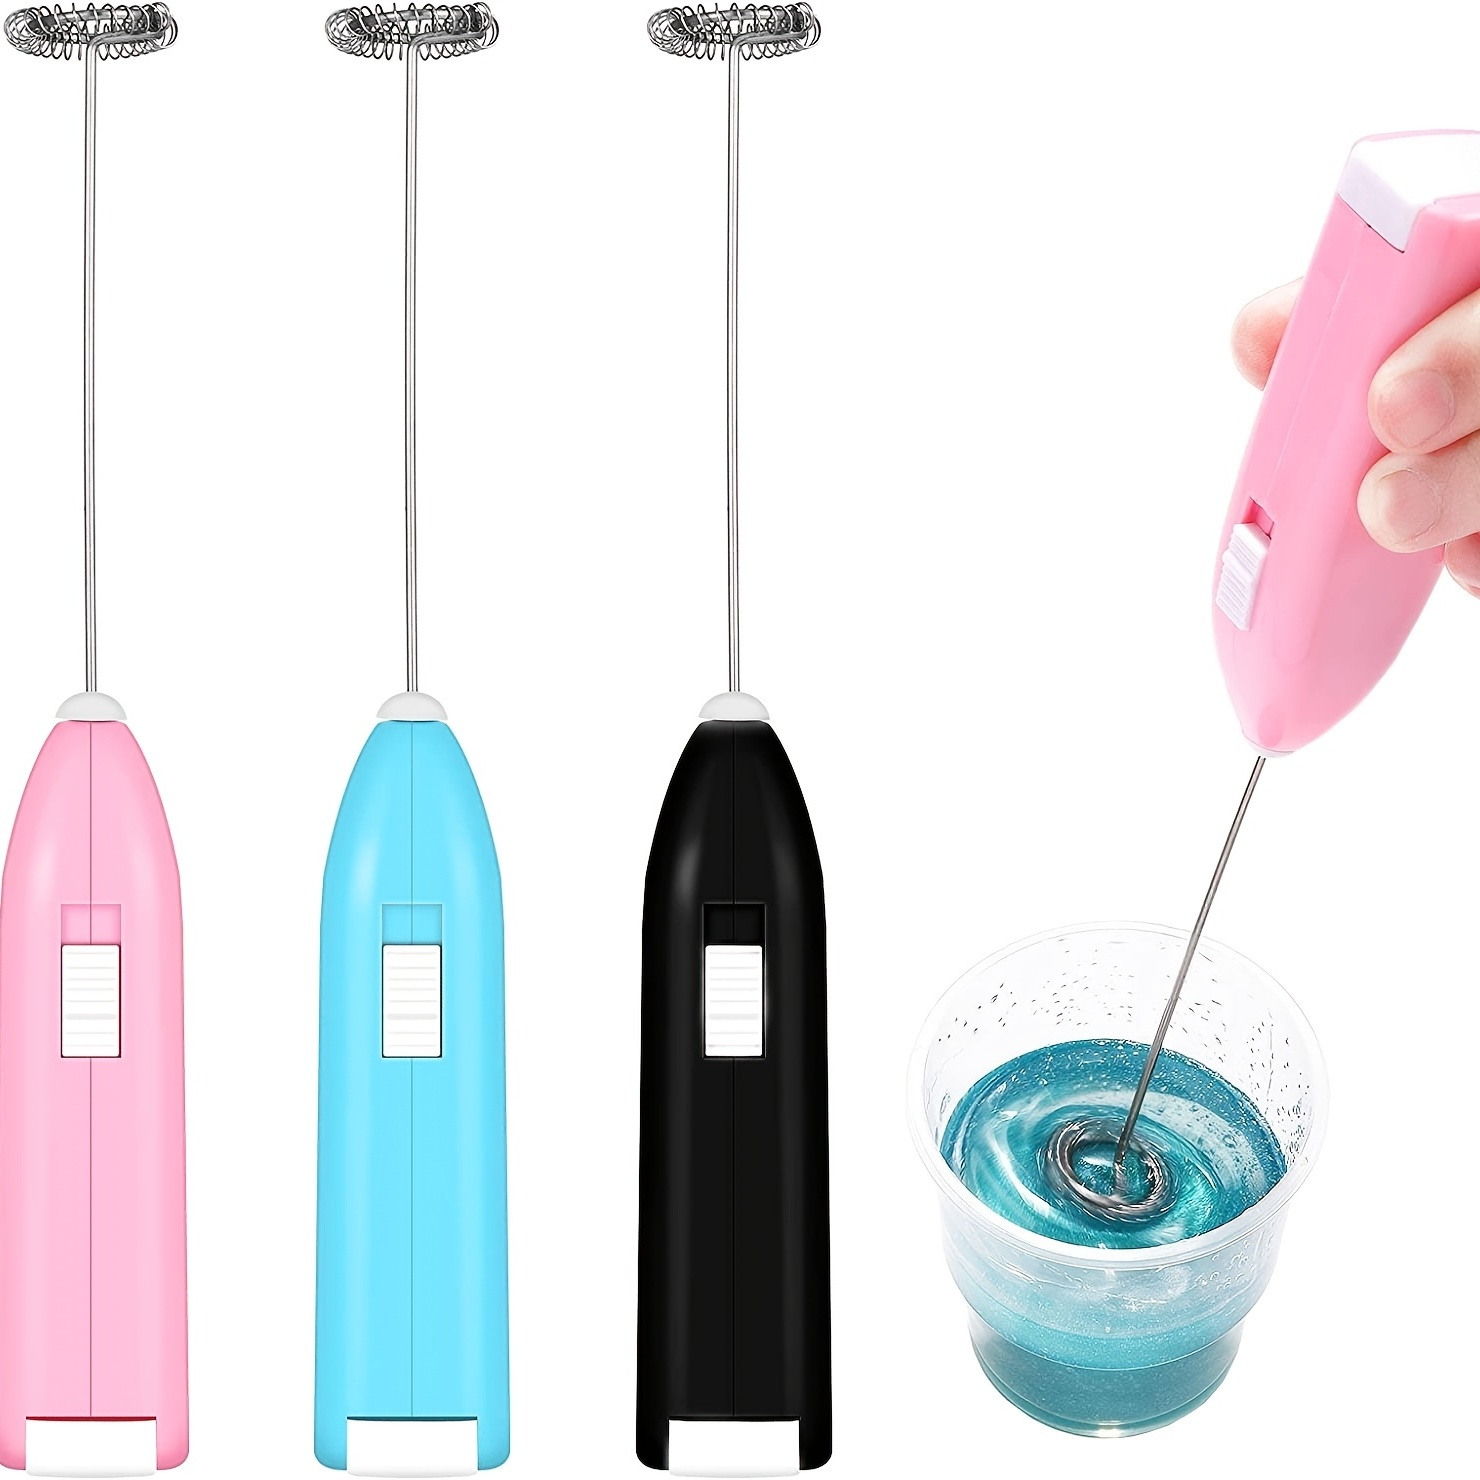 

Epoxy Resin Stirrer Handheld Battery Operated Epoxy Mixing Stick Electric Tumbler Mixer Blender With Stainless Steel For Crafts Tumbler, Making Diy Glitter Tumbler Cups